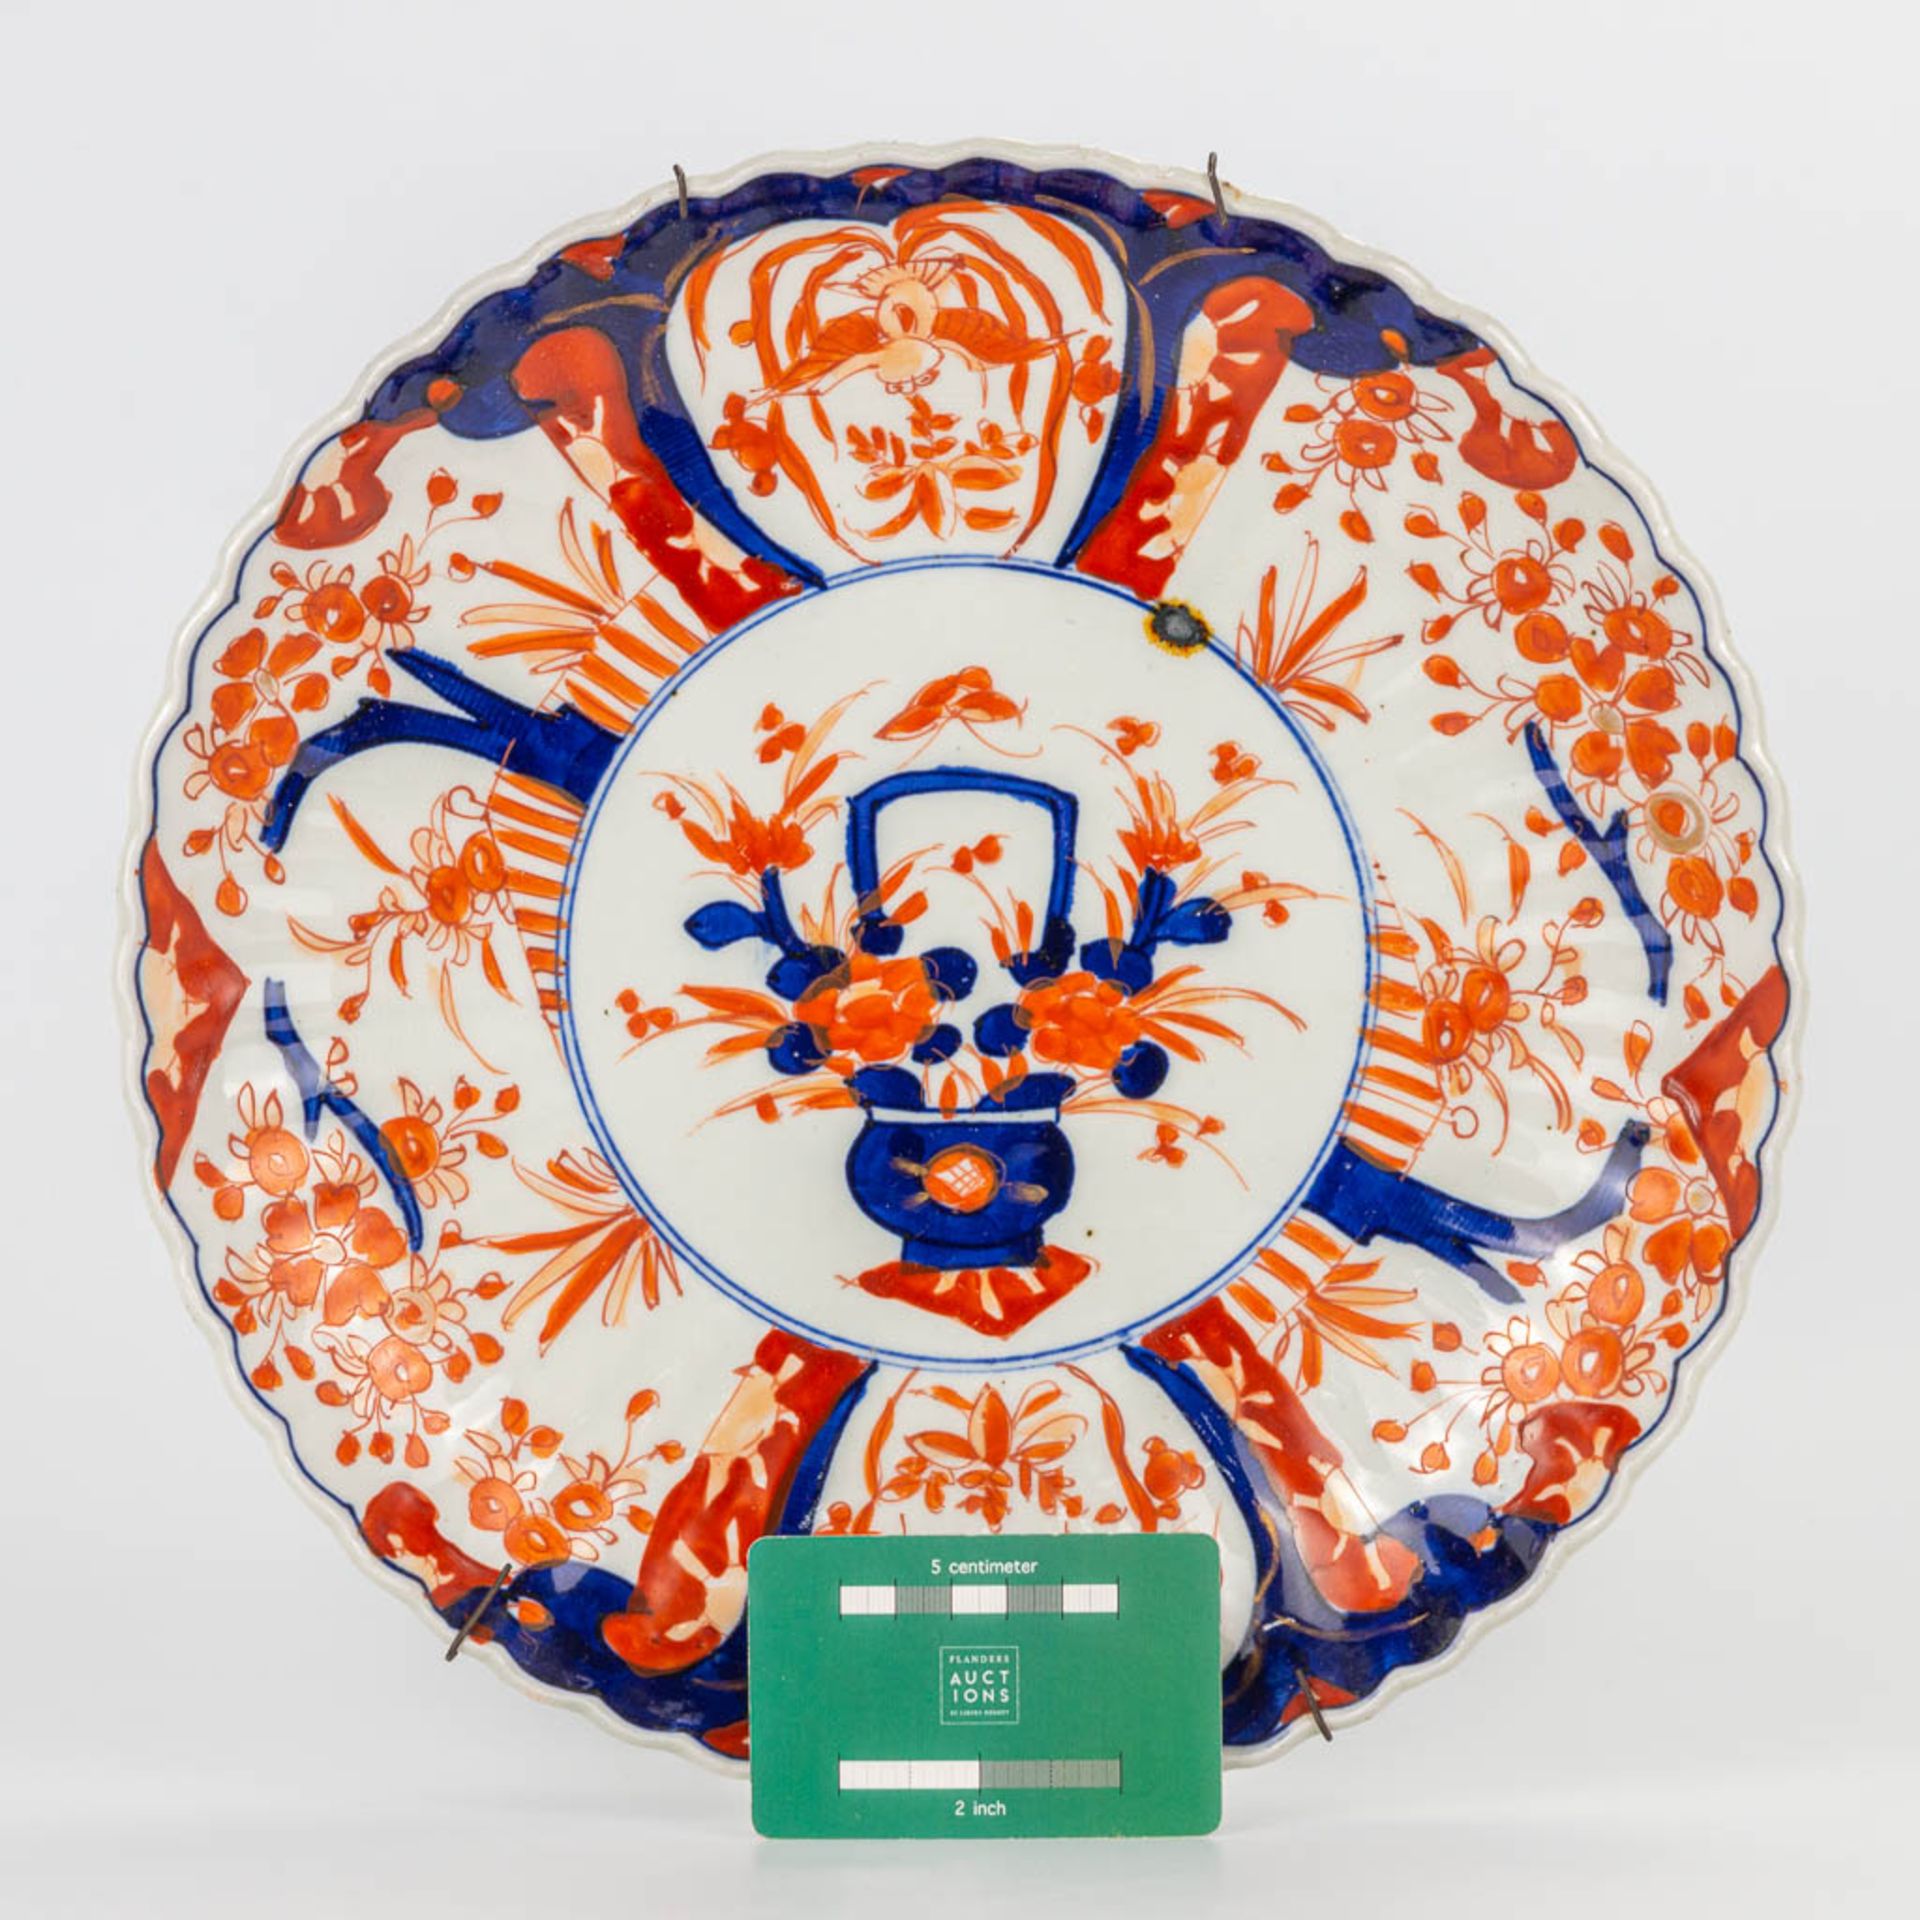 A collection of 5 Imari display plates made of Japanese porcelain. (4,5 x 30 cm) - Image 9 of 16